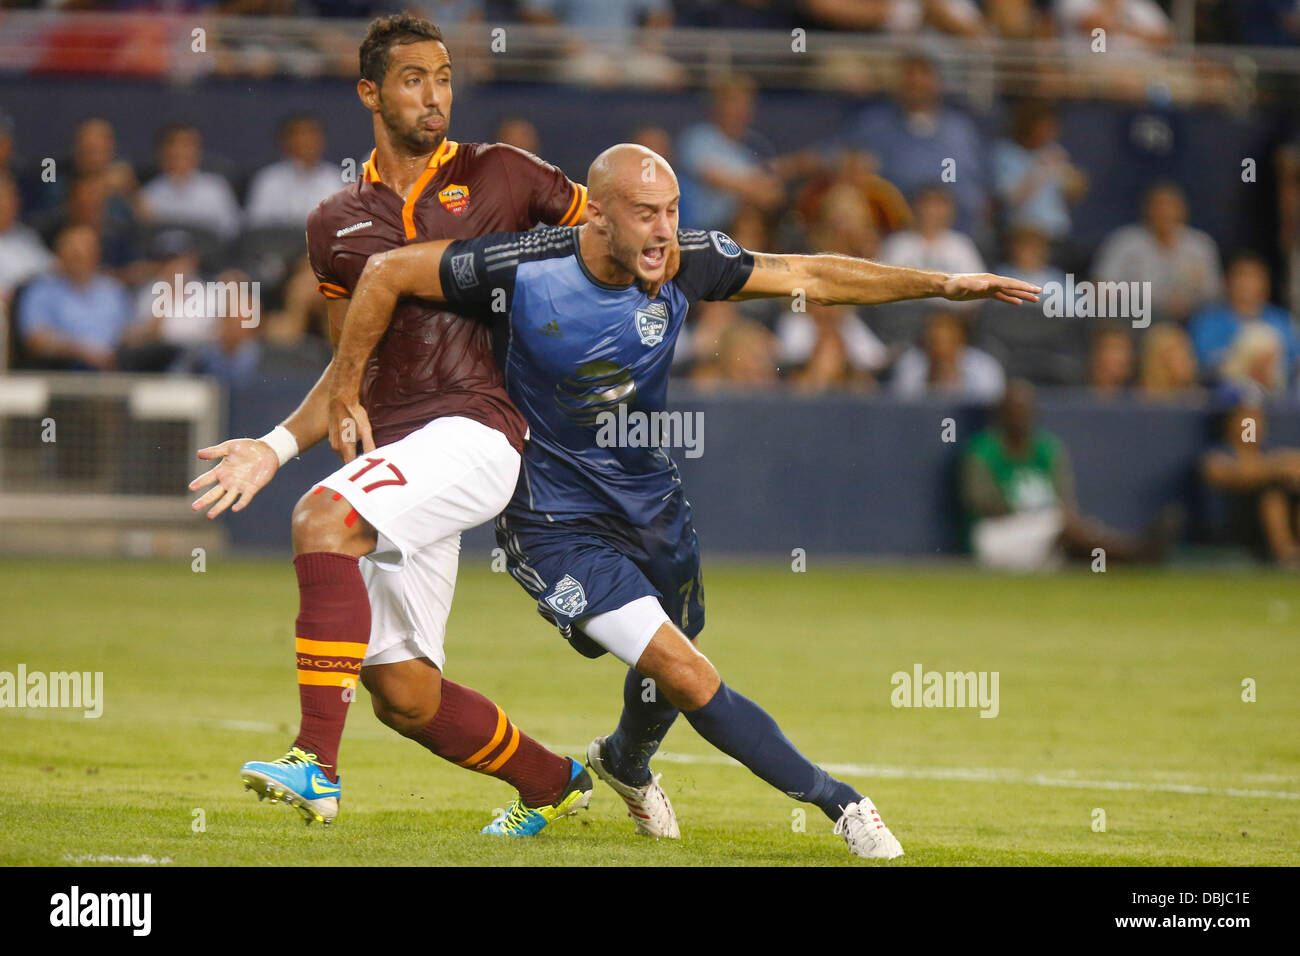 Kansas City, KS, USA. 31st July, 2013. July 31, 2013: Aurelien Collin #78 of the MLS All-Stars is taken down to the ground by Mehdi Benatia #17 of the AS Roma late in the first half during the MLS All-Star game between AS Roma and the MLS All-Stars at Livestrong Stadium in Kansas City KS Credit:  csm/Alamy Live News Stock Photo